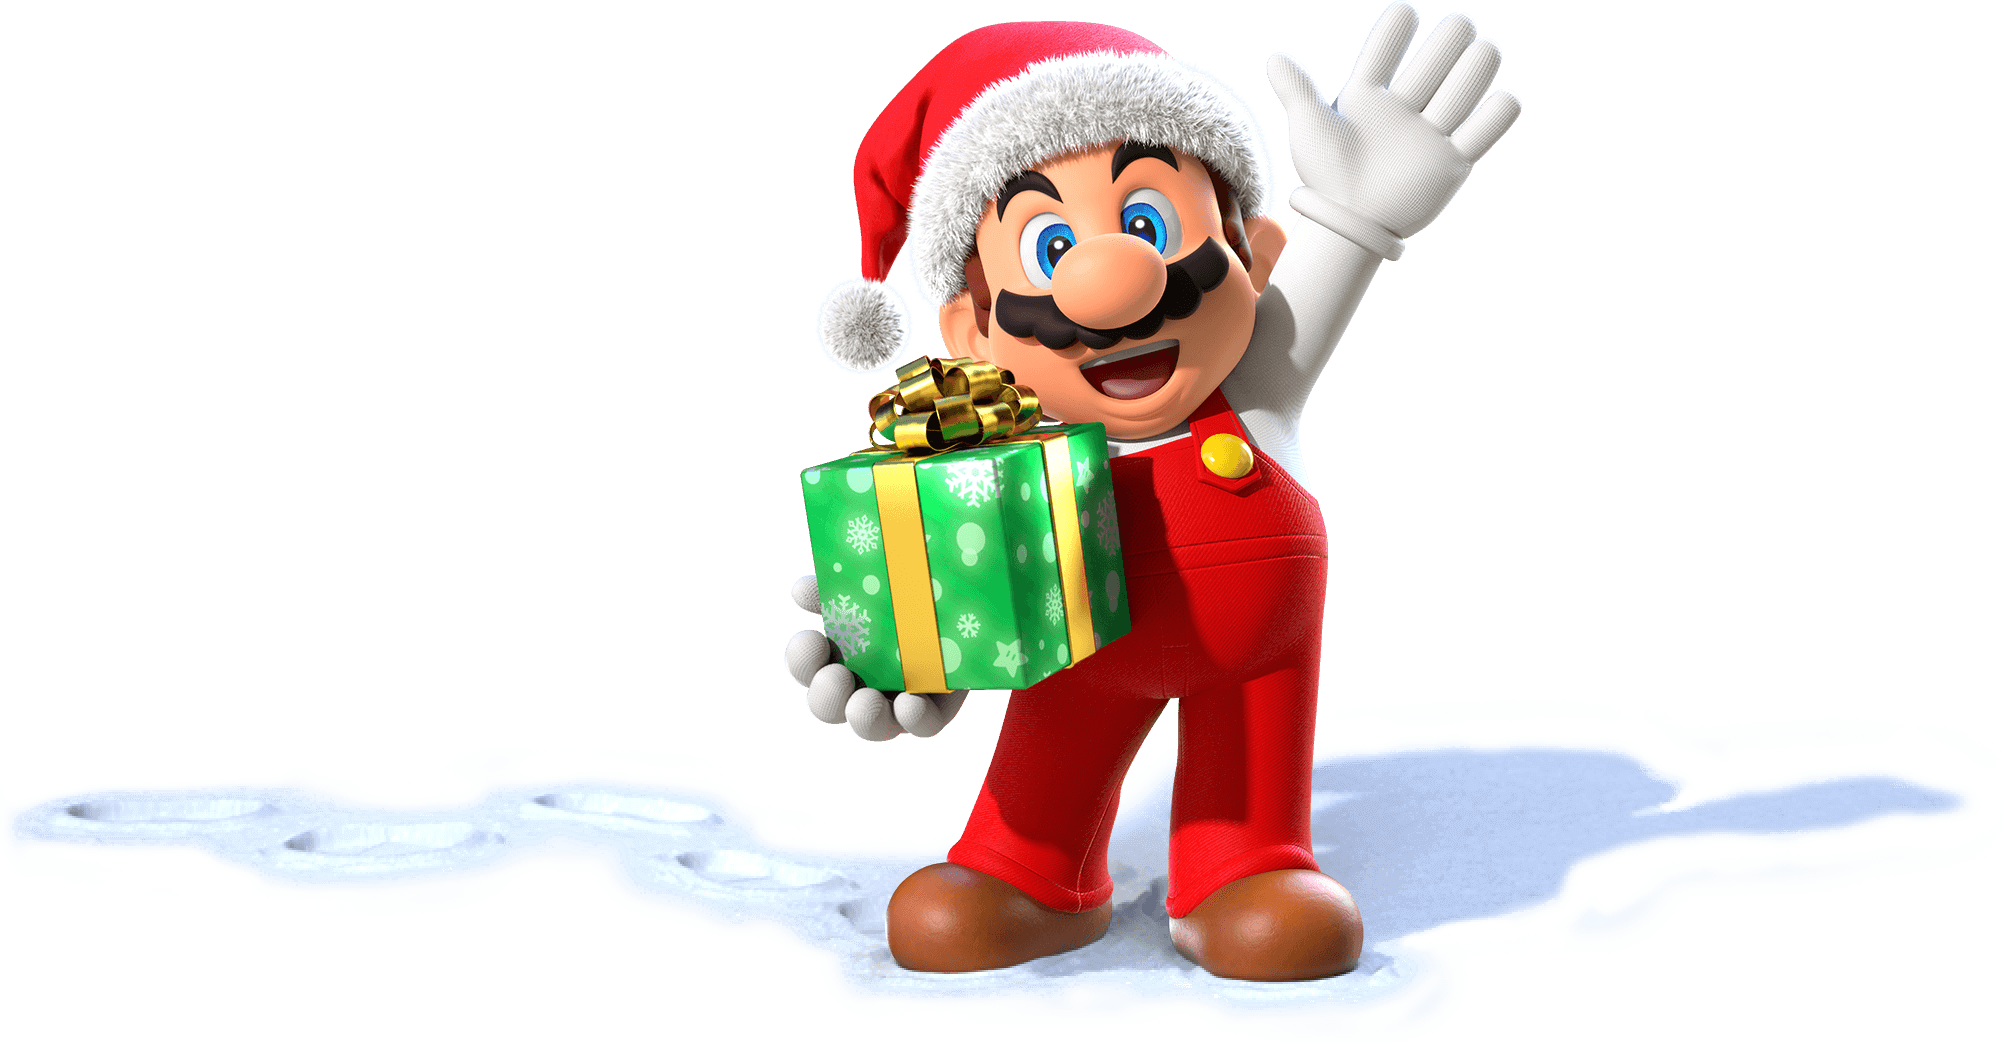 The First of December: A Festive Gaming Poem